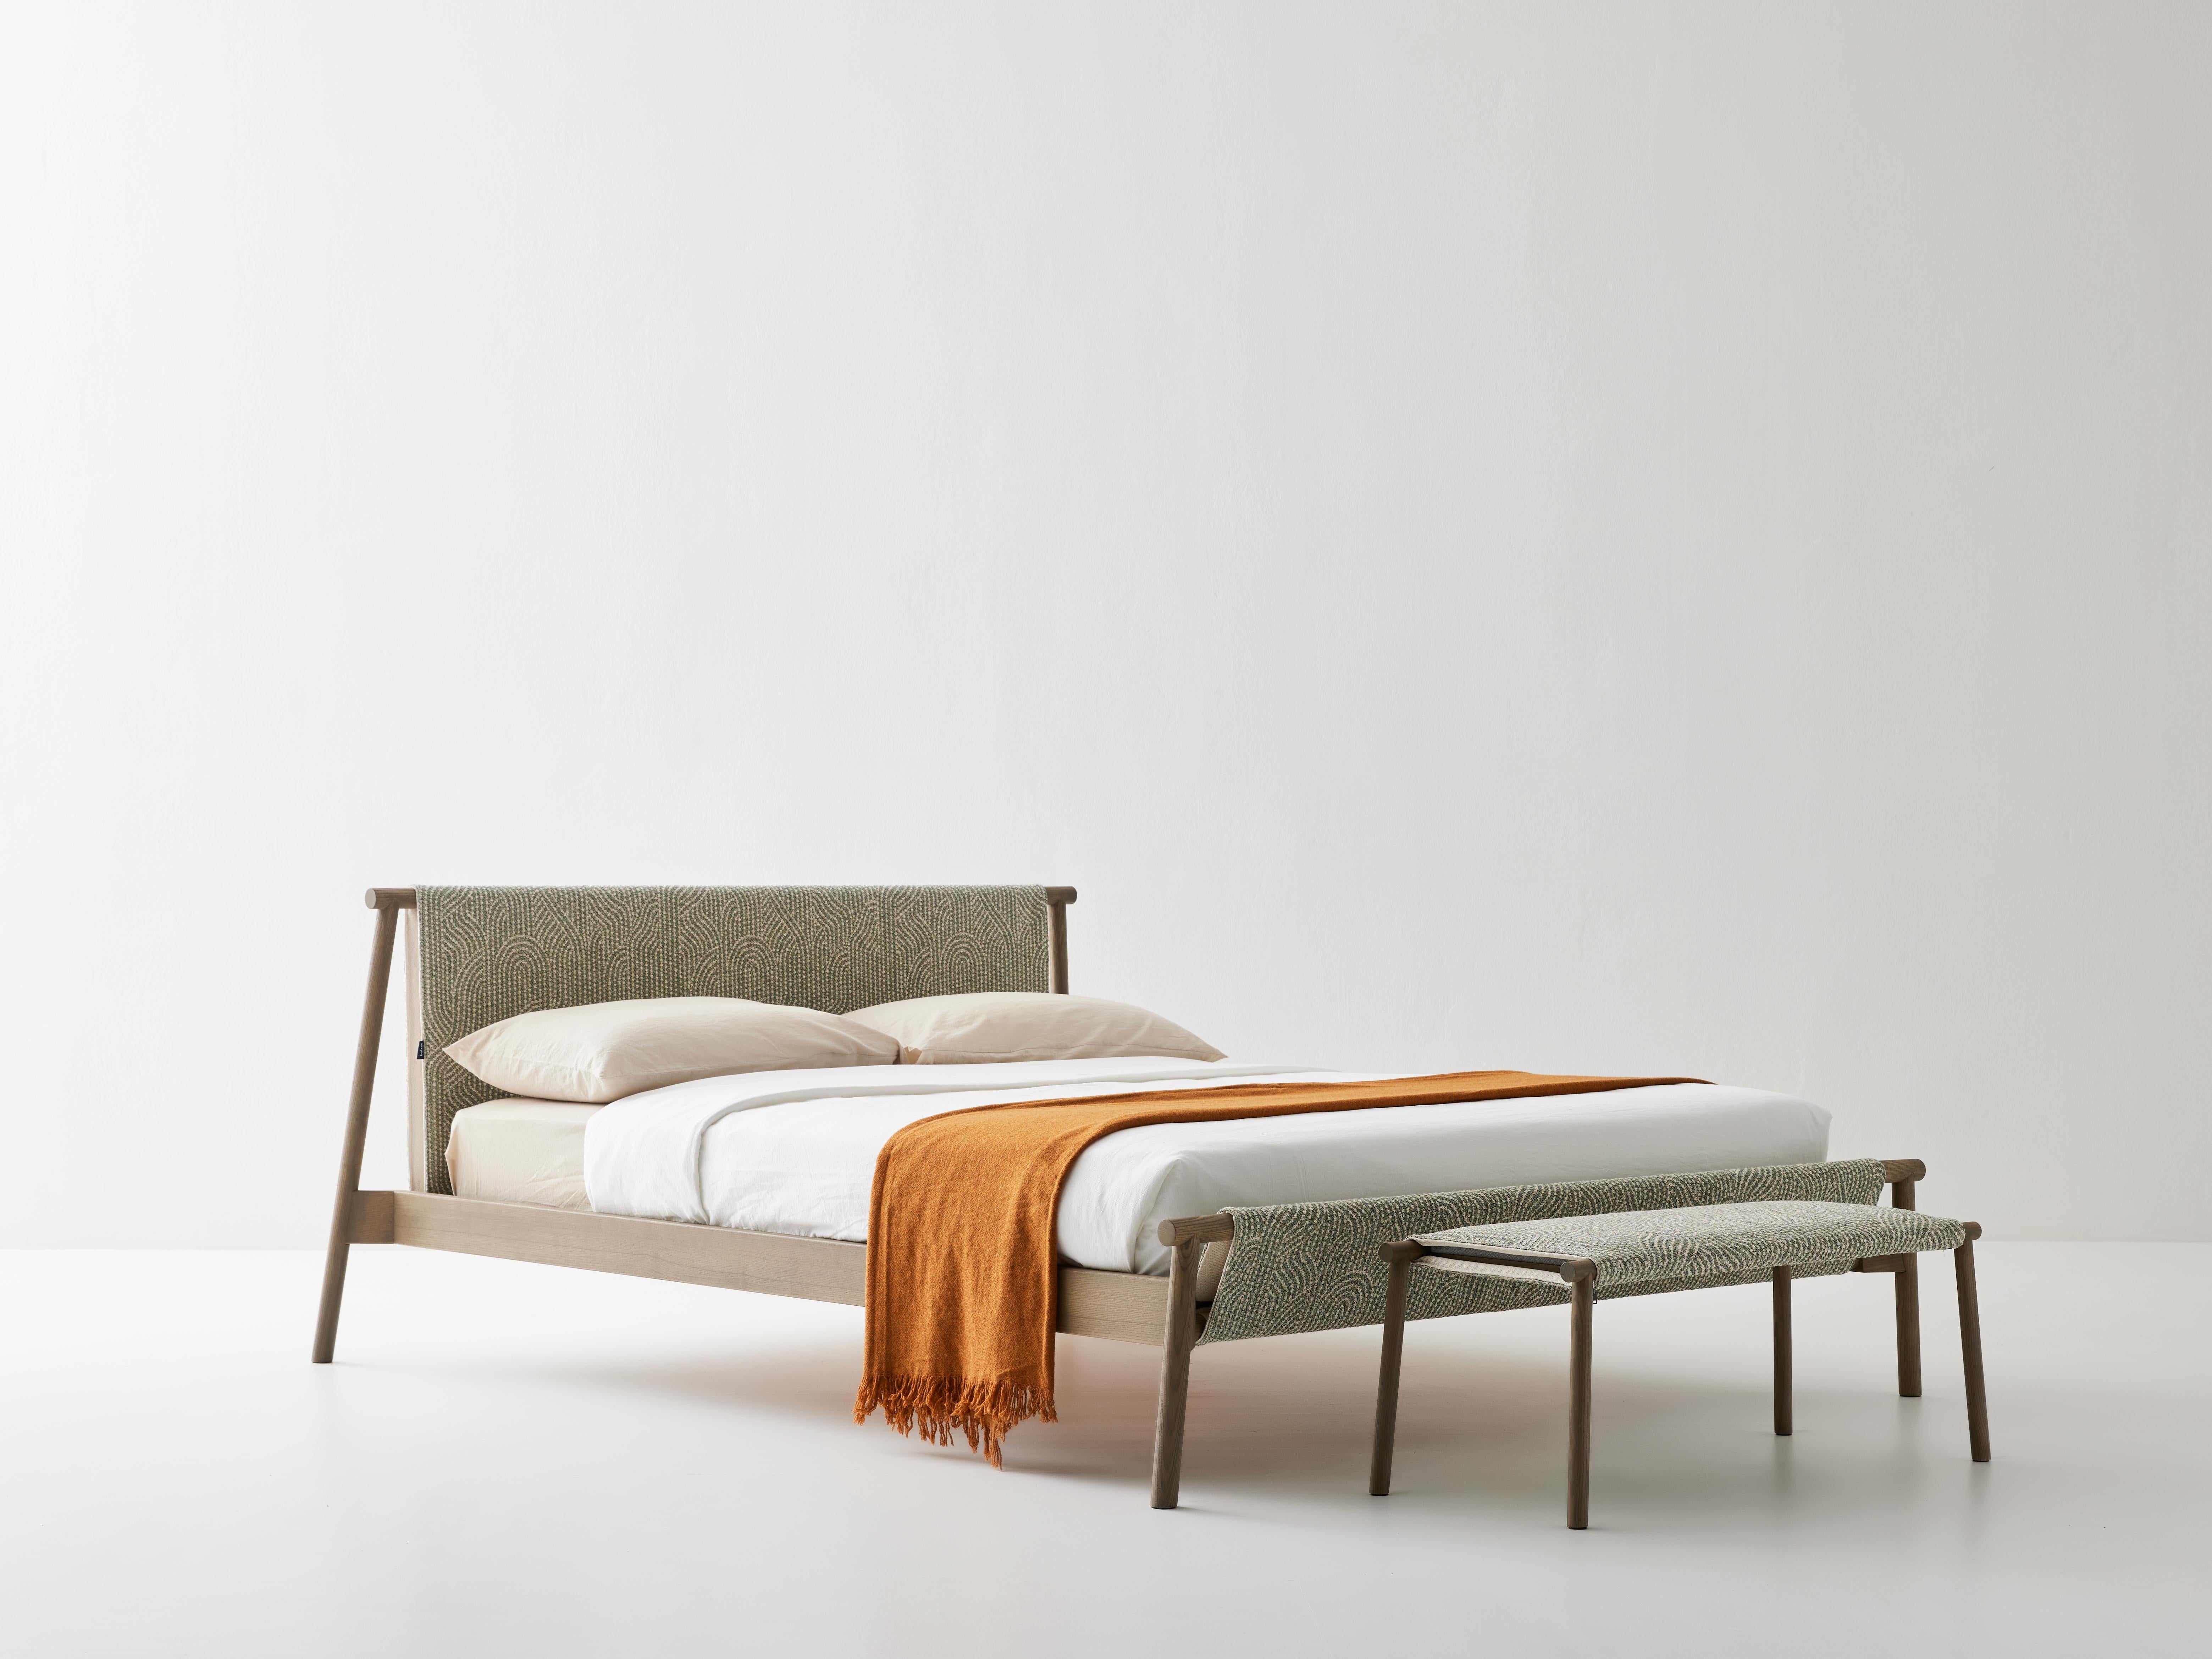 The new Jack is the reinterpretation of the first collection designed by Zanellato / Bortotto for the Bolzan company, in 2017. Wanting to create a timeless object that could last as long as possible, the designers chose not to design a new bed, but